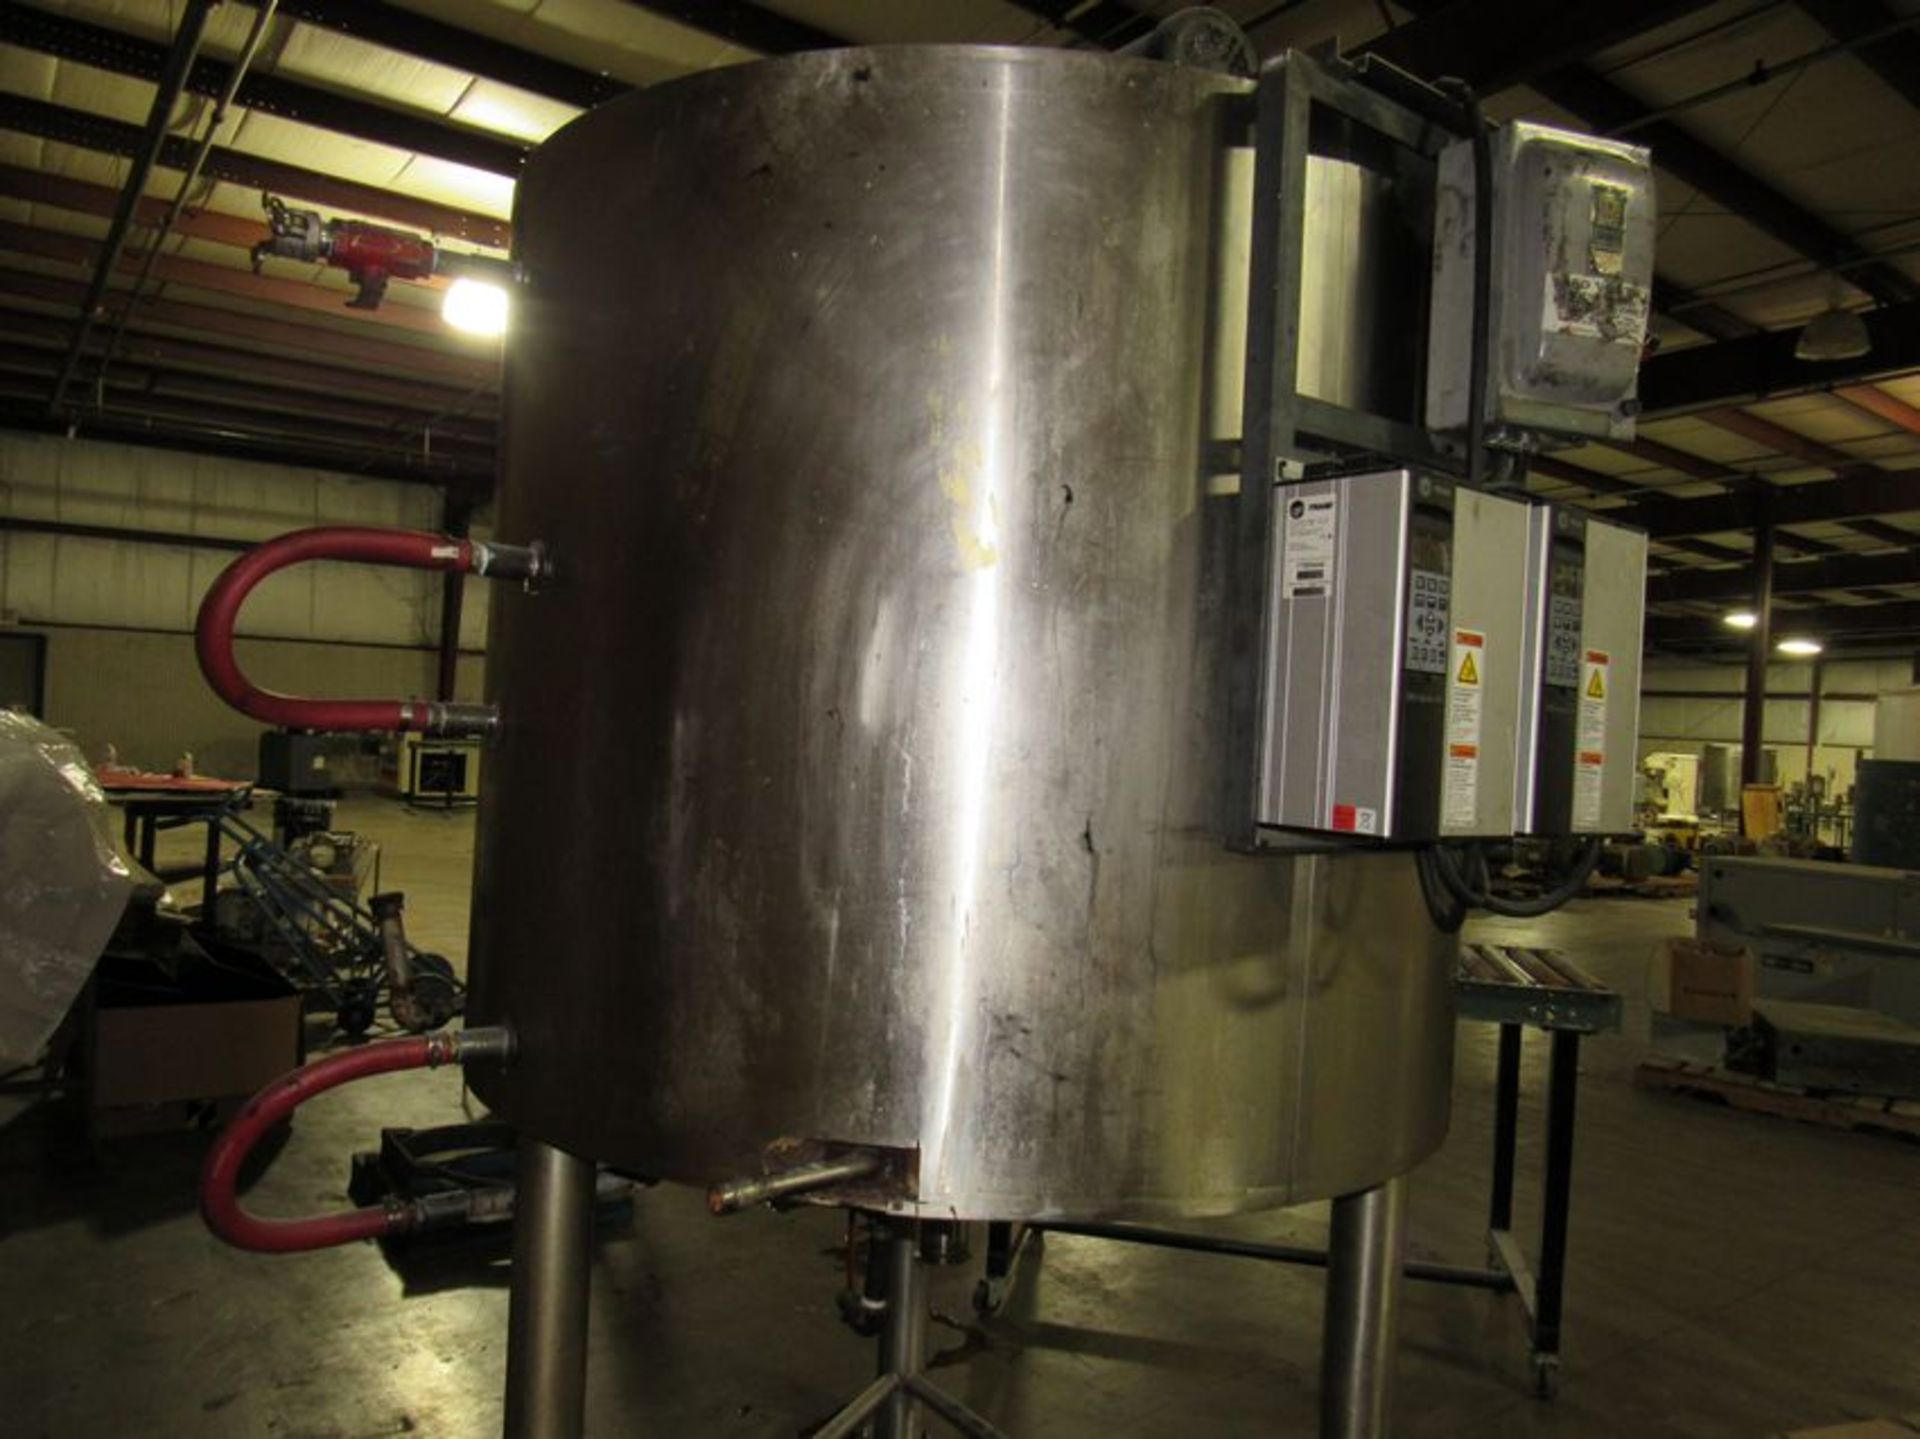 1500 liter food grade stainless steel jacketed tank in great condition. Inside approx. 4ft ft. dia - Image 3 of 11